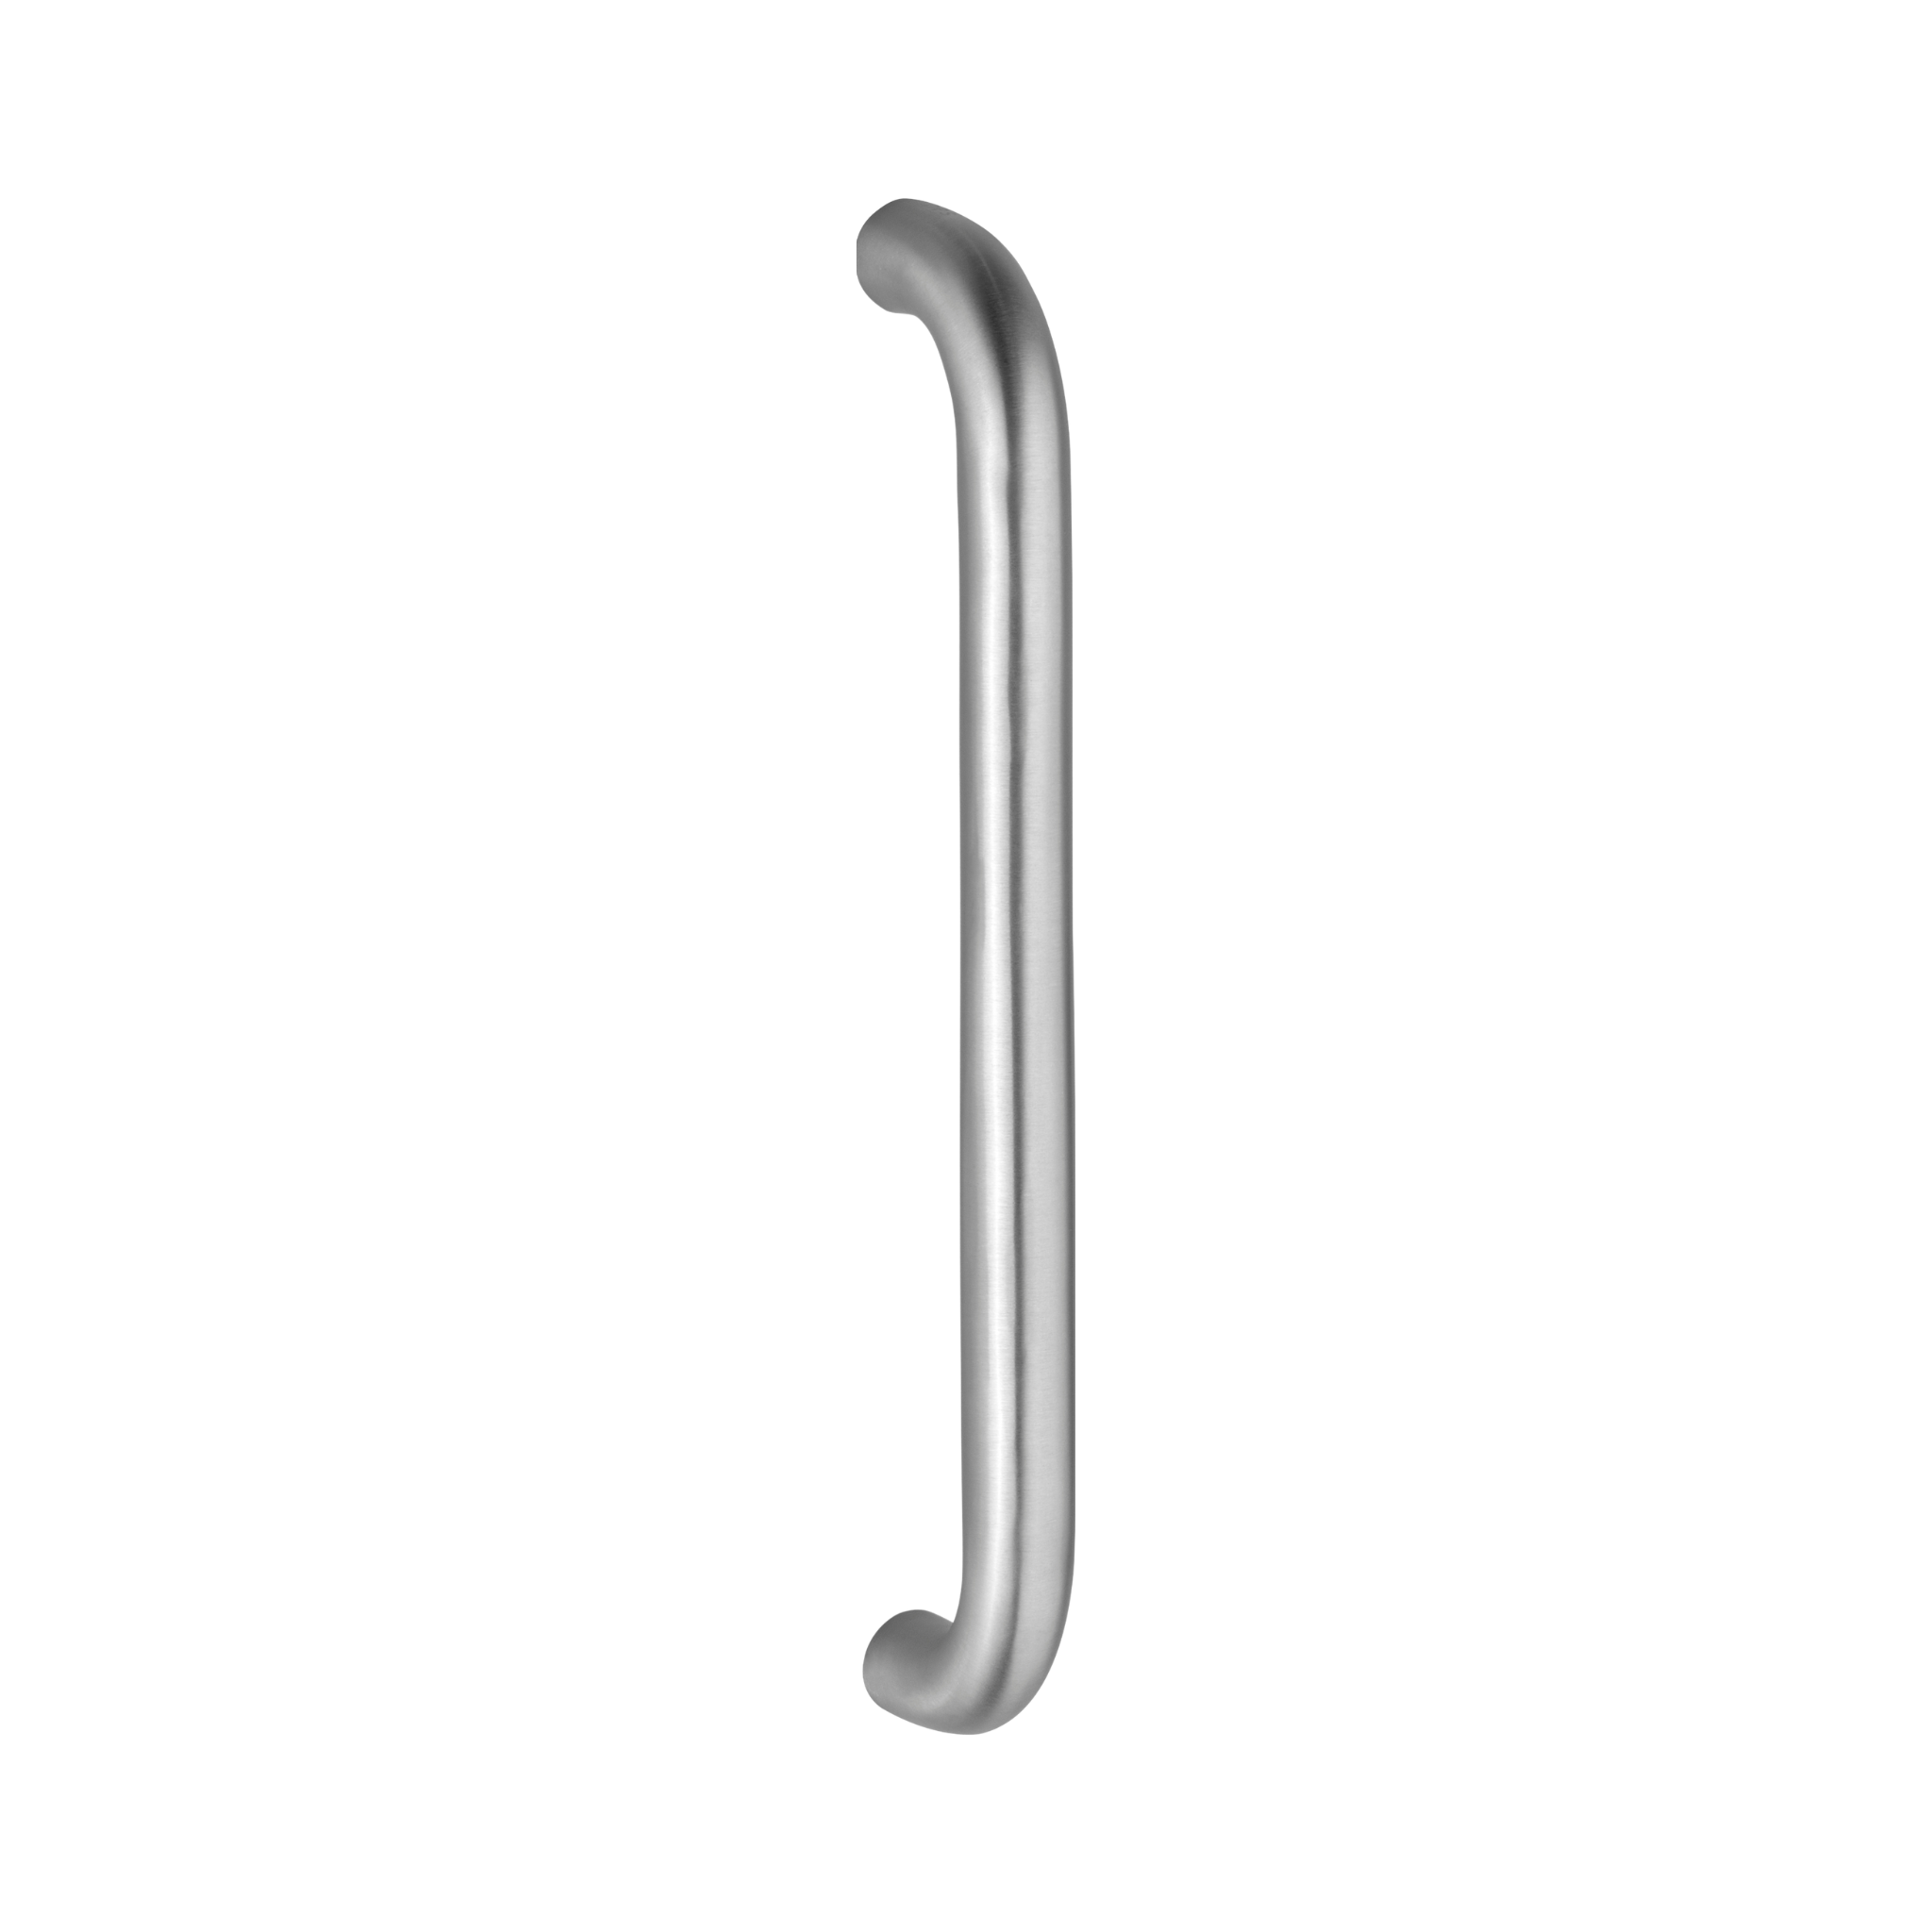 FP.D08.BTF.TR, Pull Handle, Tubular, D Handle, BoltThru, 22mm (Ø) x 300mm (l) x 278mm (ctc), Stainless Steel with Tarnish Resistant, CISA